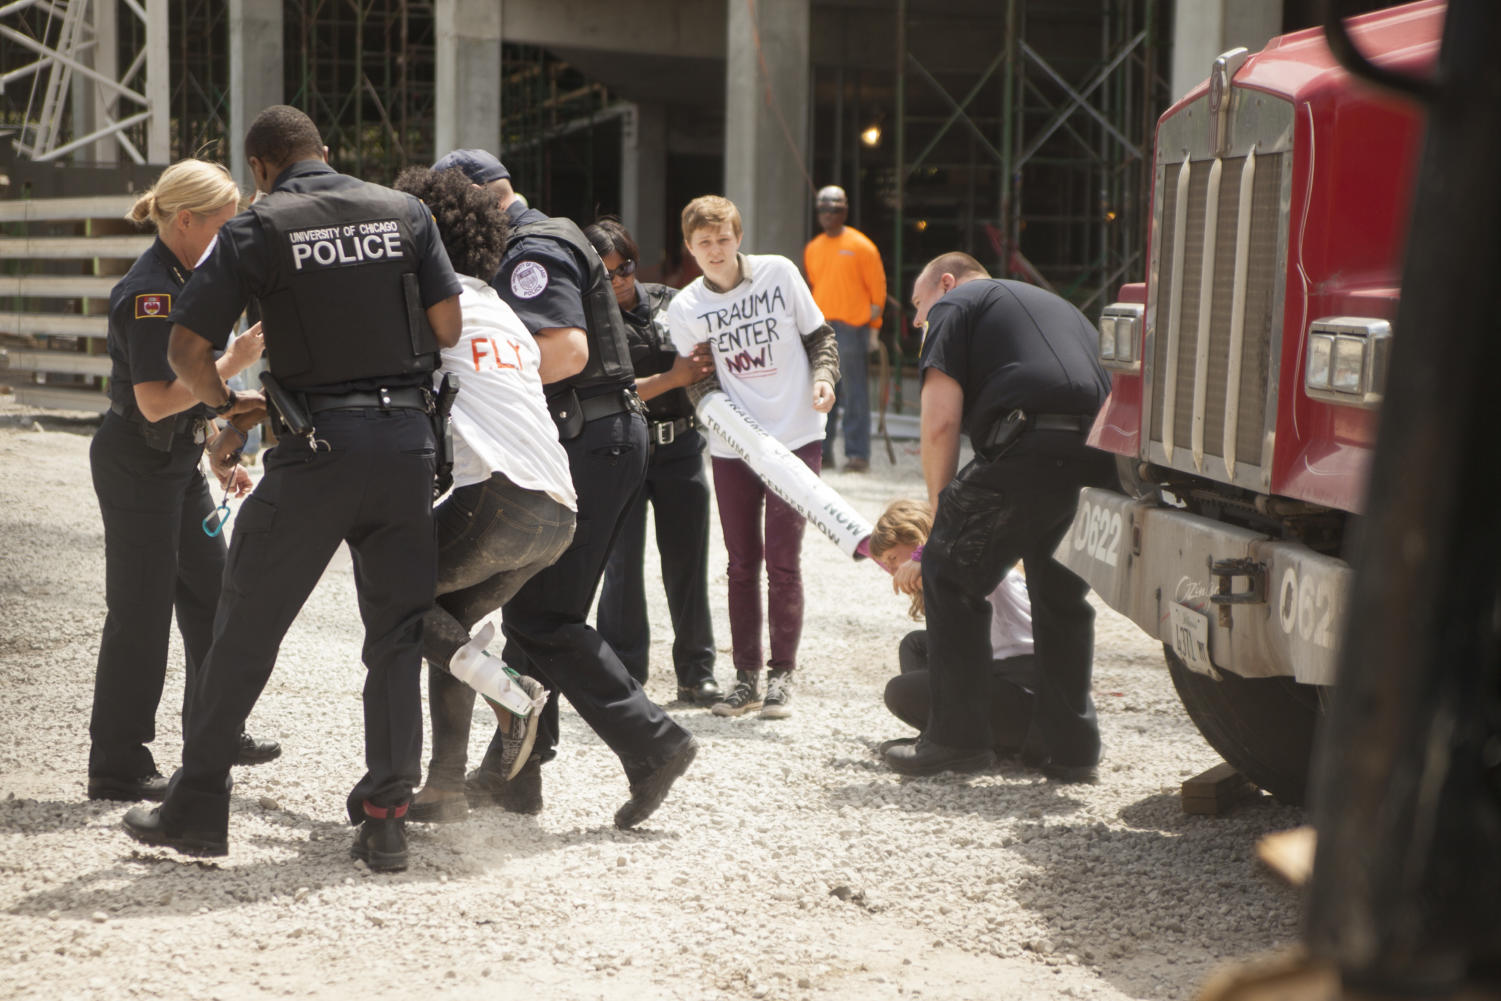 Forty minutes after entering the construction site, University police removed FLY member Tori Crider (left) and second-years Kayli Horne (center) and Helena Bassett from the premise.